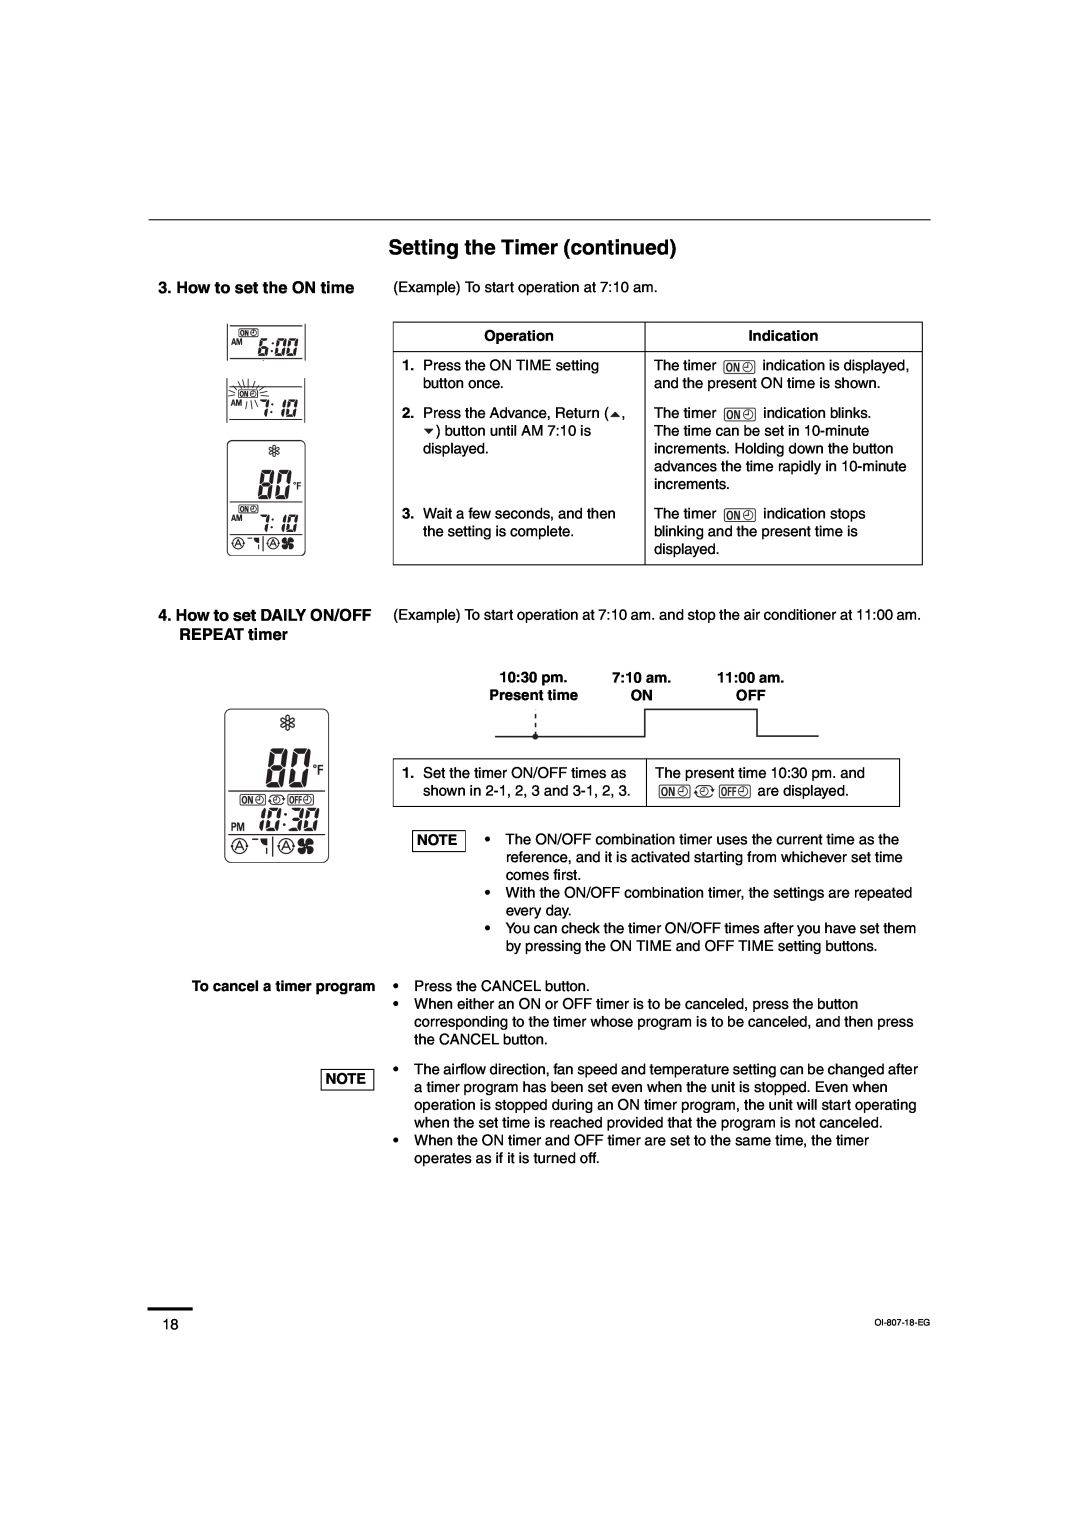 Sanyo KMS2472, KMS1872 service manual Setting the Timer continued, REPEAT timer 